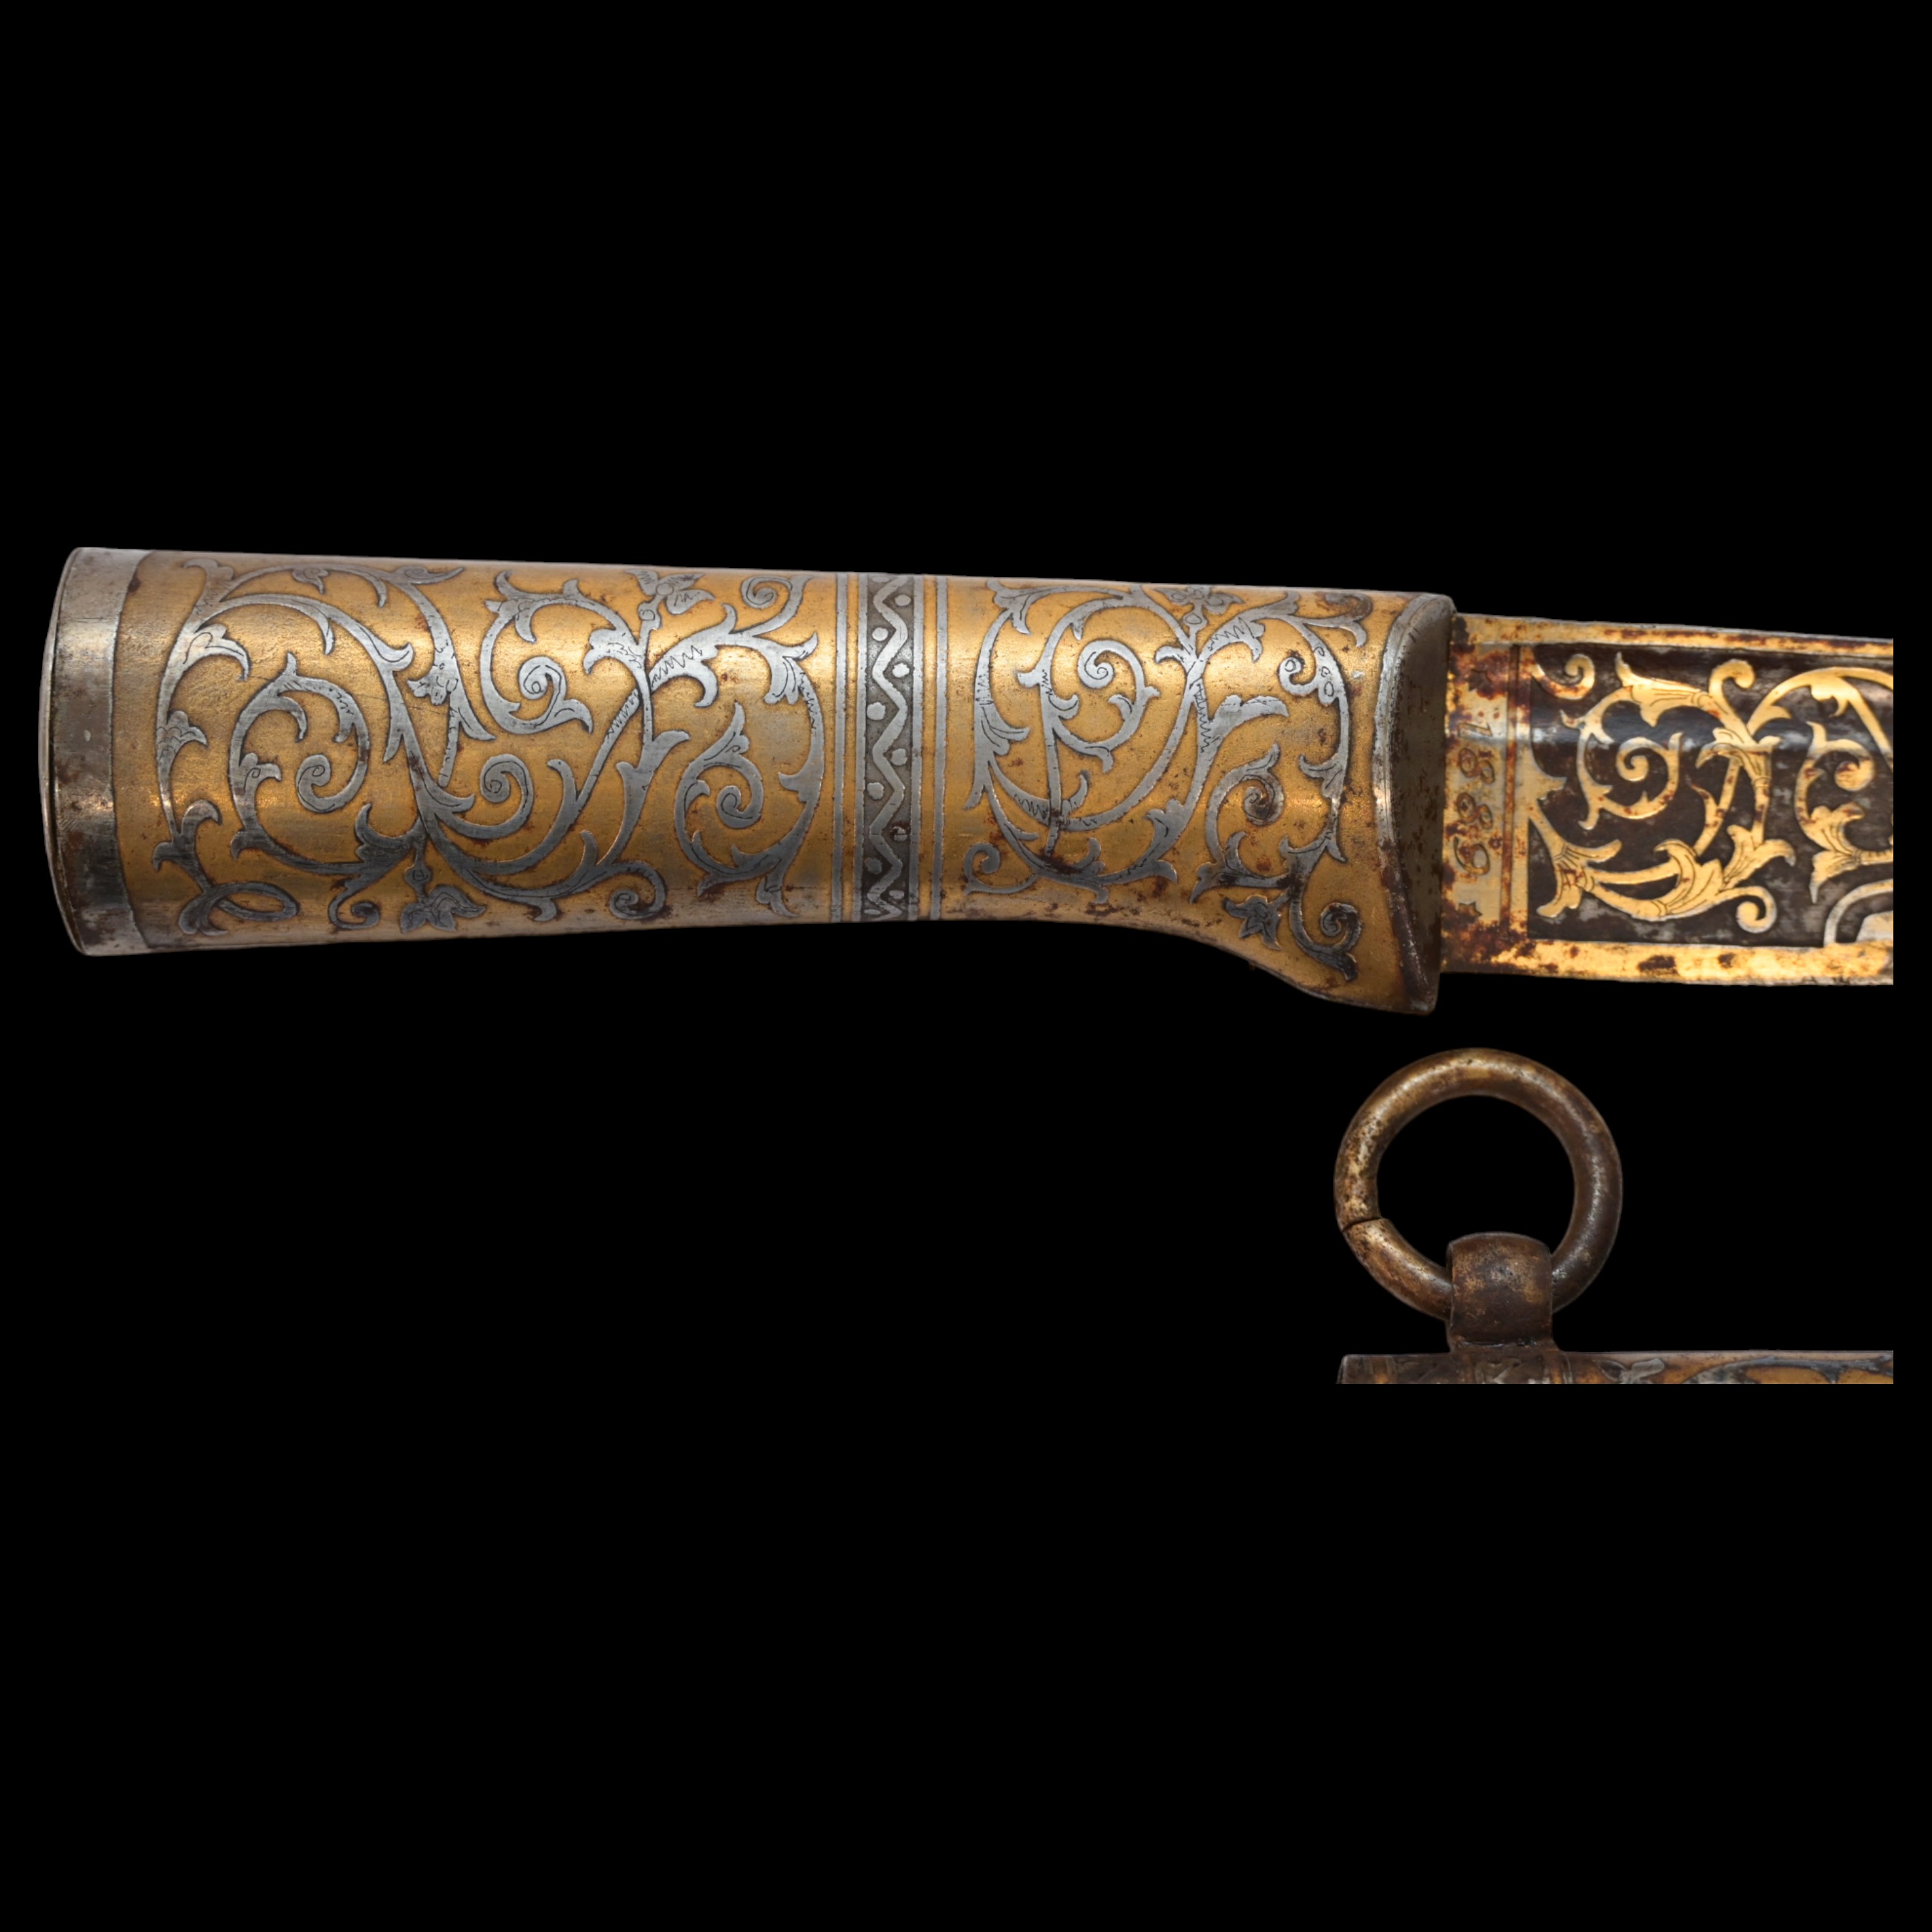 RARE HUNTING KNIFE, DECORATED WITH GOLD AND BLUE, RUSSIAN EMPIRE, ZLATOUST, 1889. - Image 18 of 26